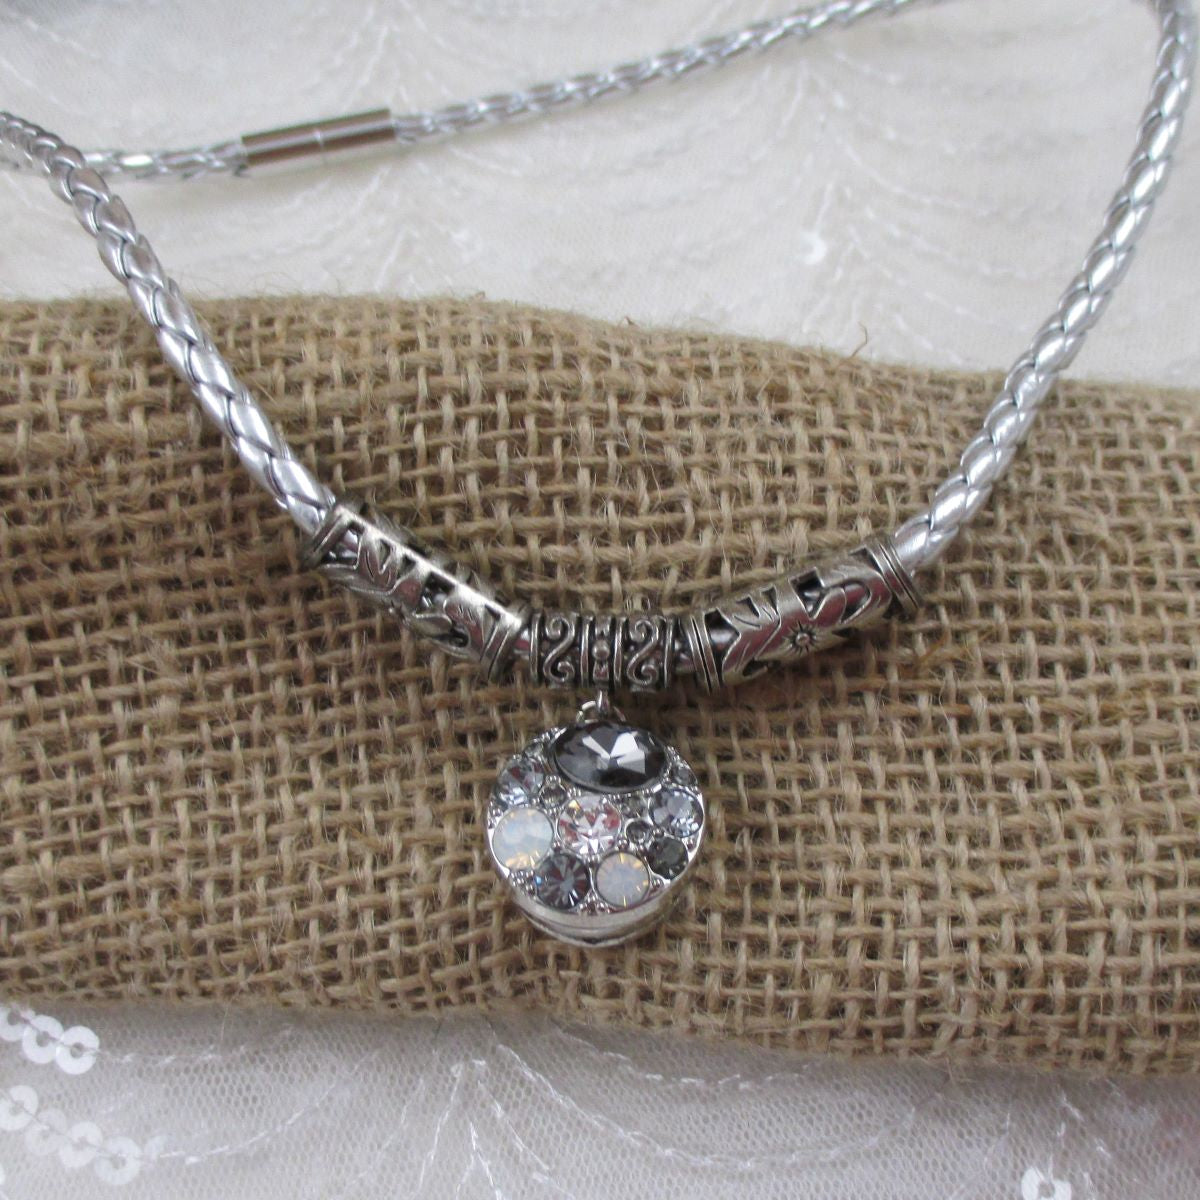 Silver Braided Leather Necklace with Shades of Grey Pendant - VP's Jewelry